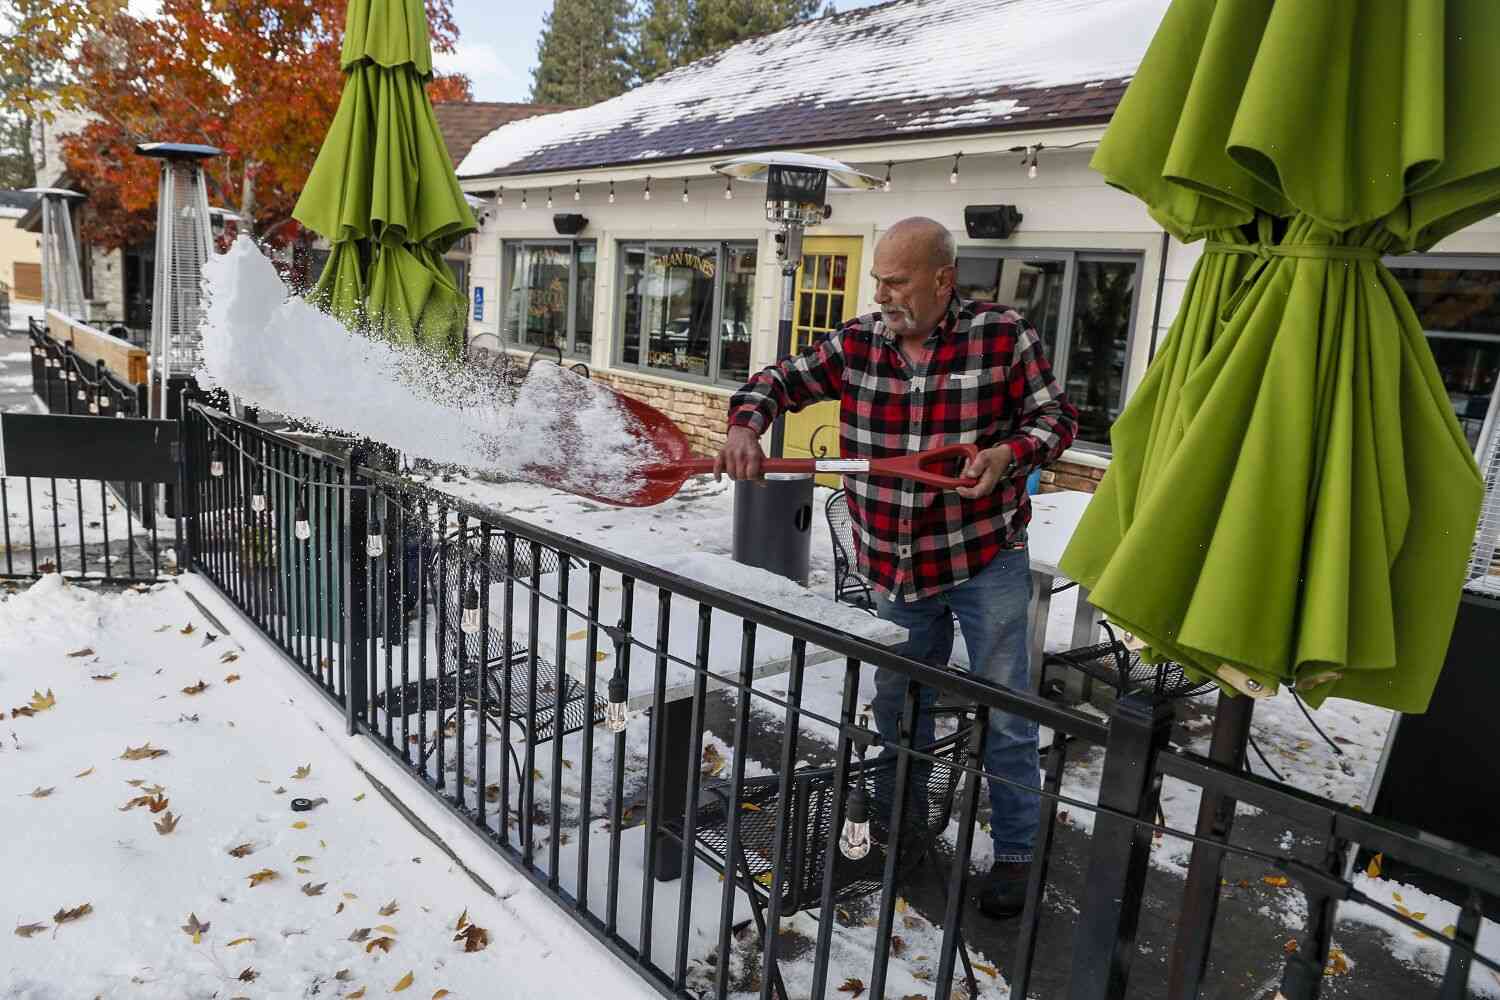 Snowfall in the Sierra Nevada could be heavier than usual